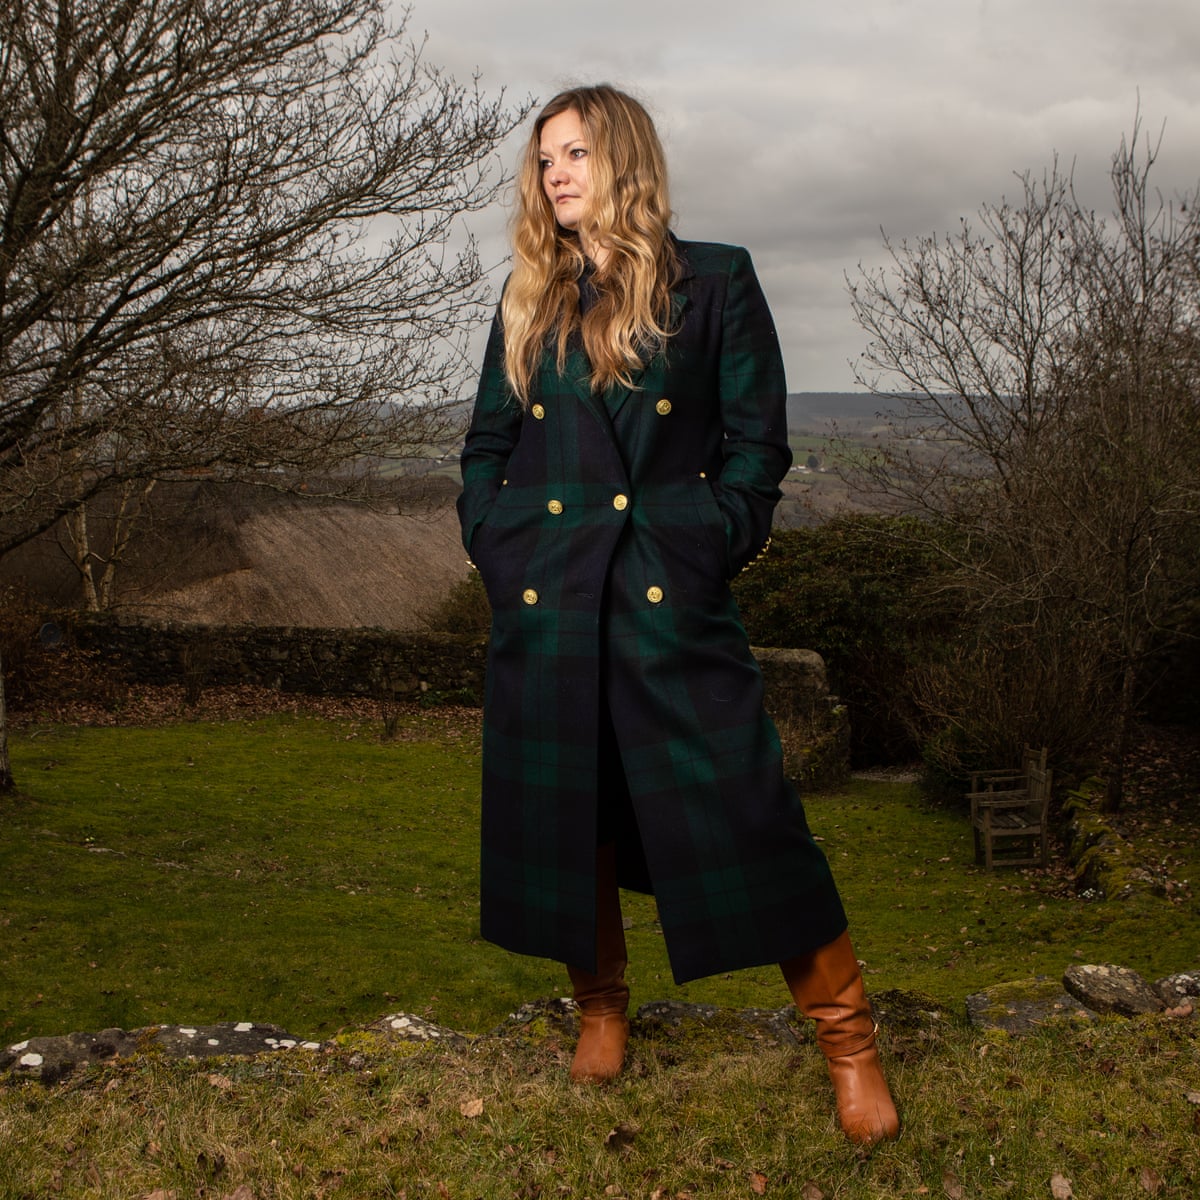 This photograph of Catriona Ward features a feminine person with long, wavy blonde hair. Her expression is thoughtful. She is wearing a long green-and-blue plaid coat with wide shoulders and gold buttons, and a pair of tan boots. She stands in front of grey skies over rolling green hills and cliffs.